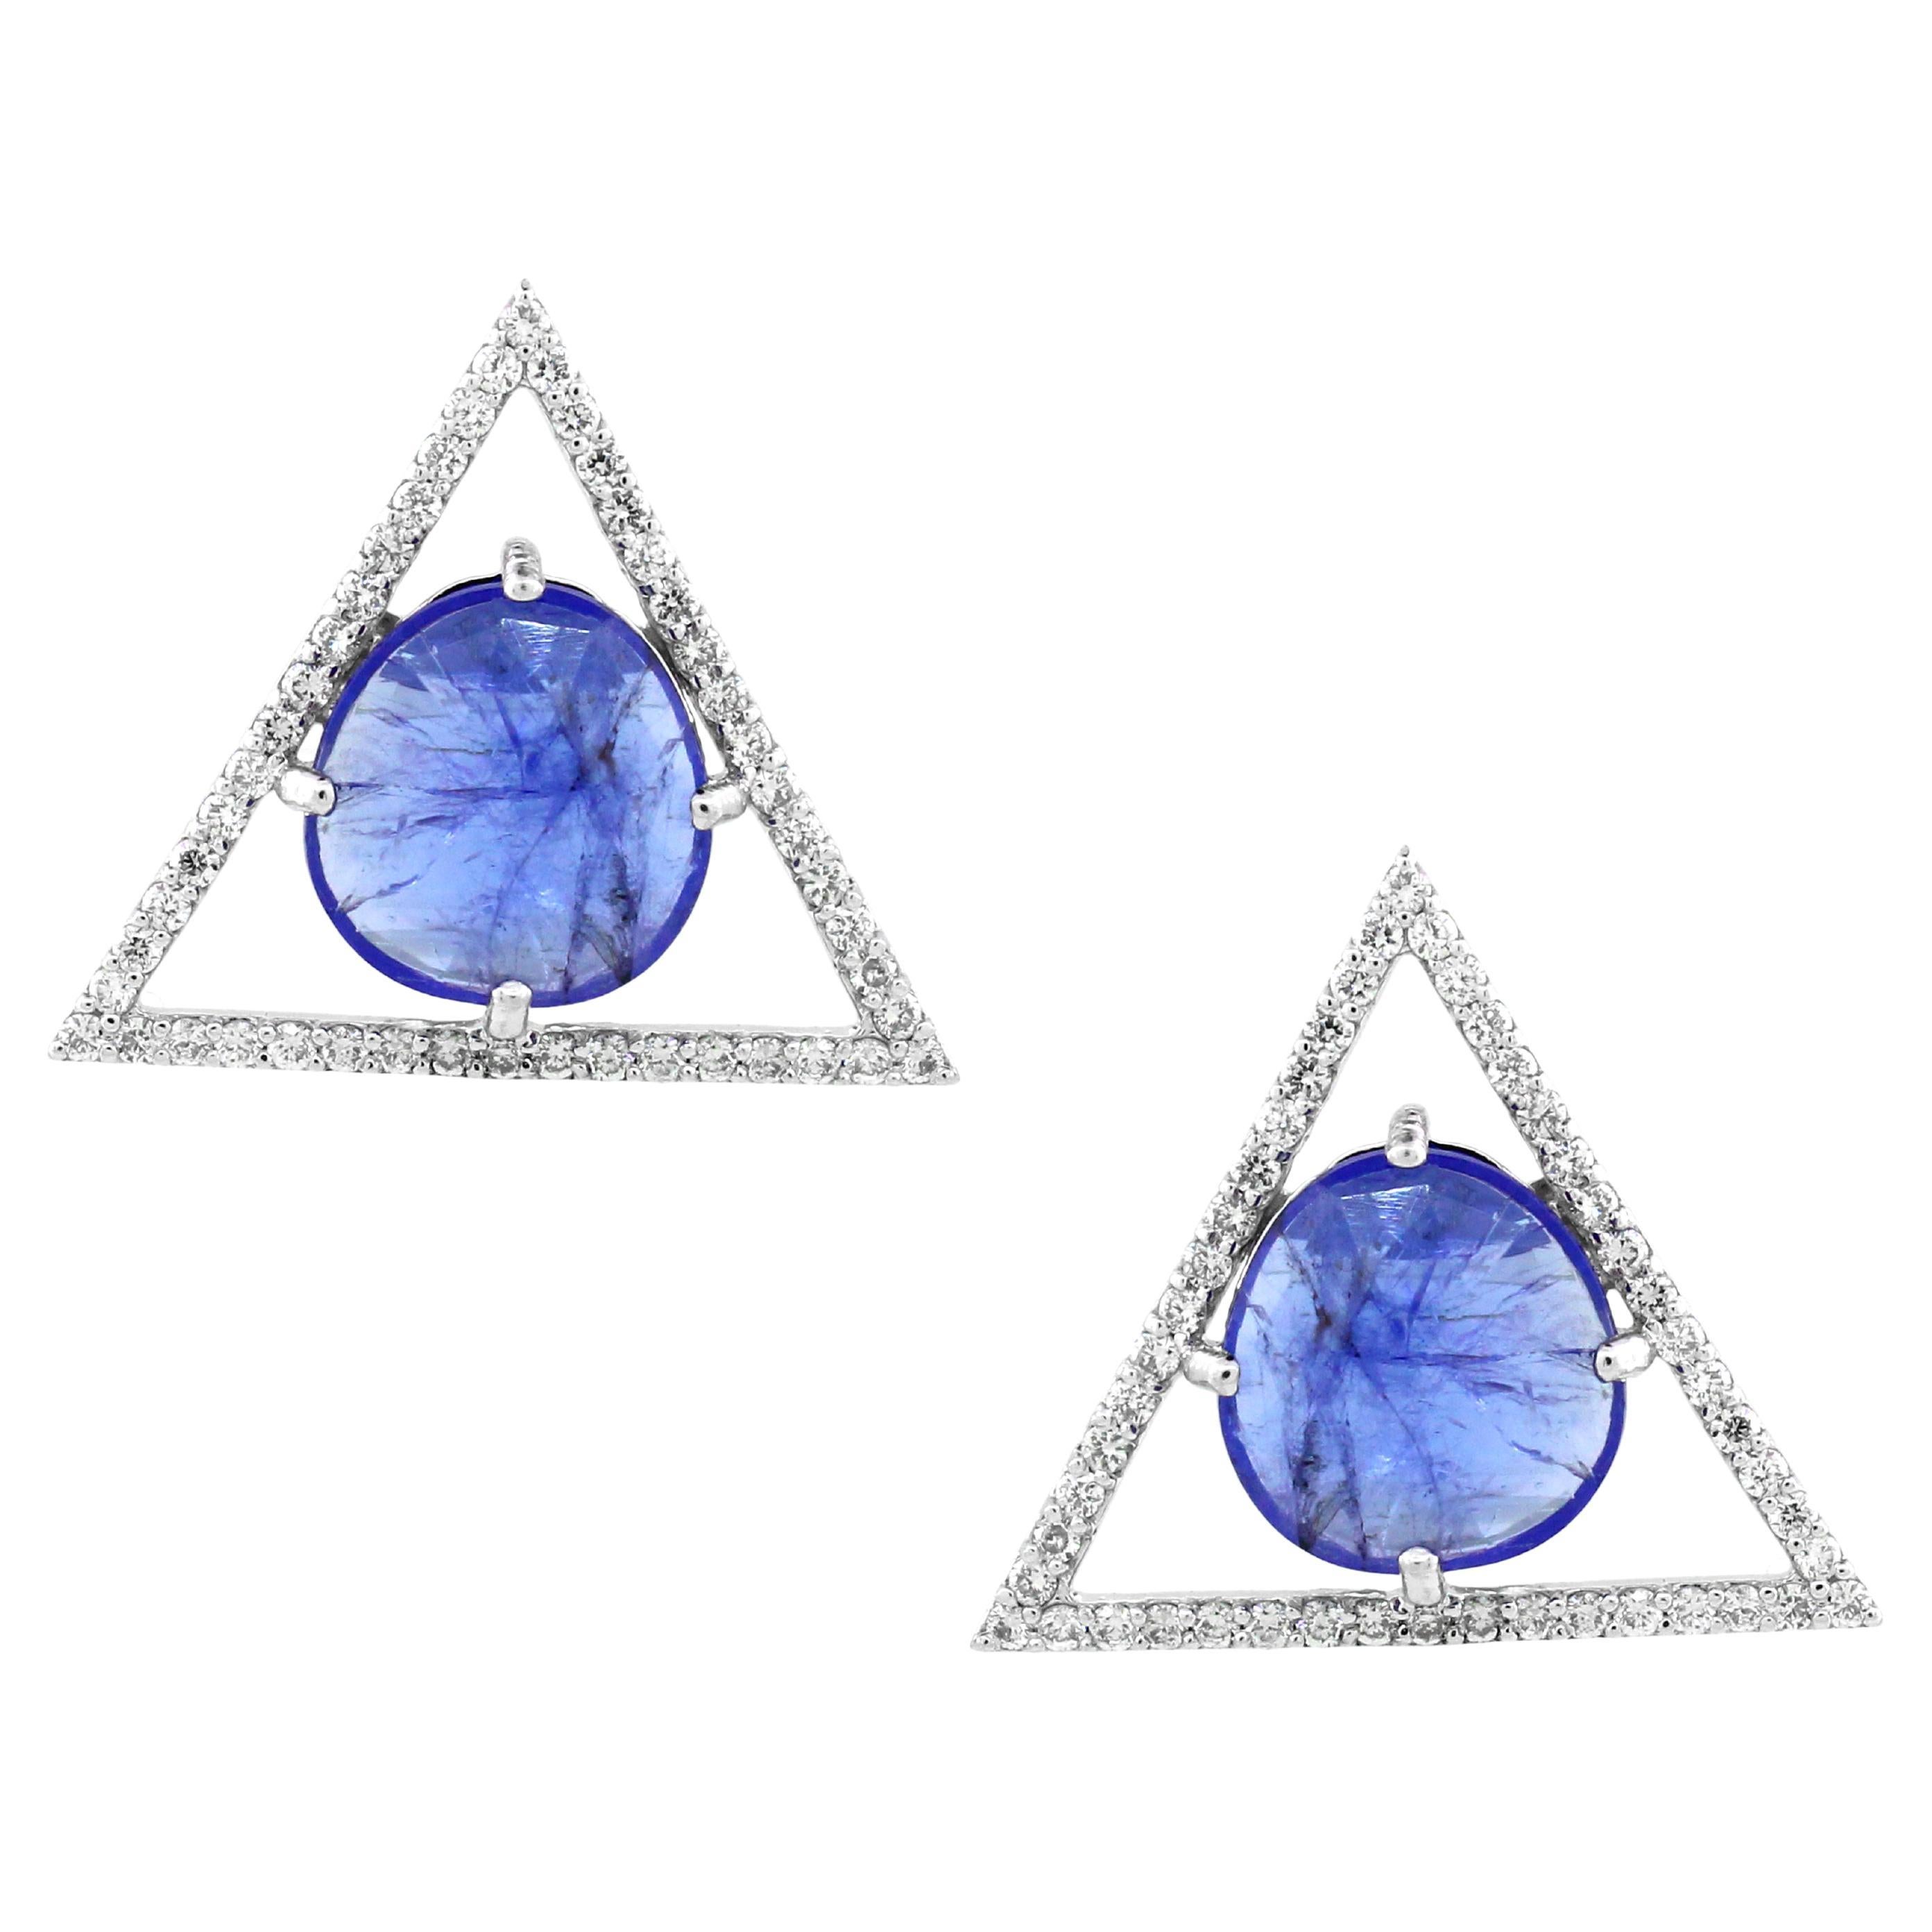 5.82 carats of Tanzanite Stud Earrings For Sale